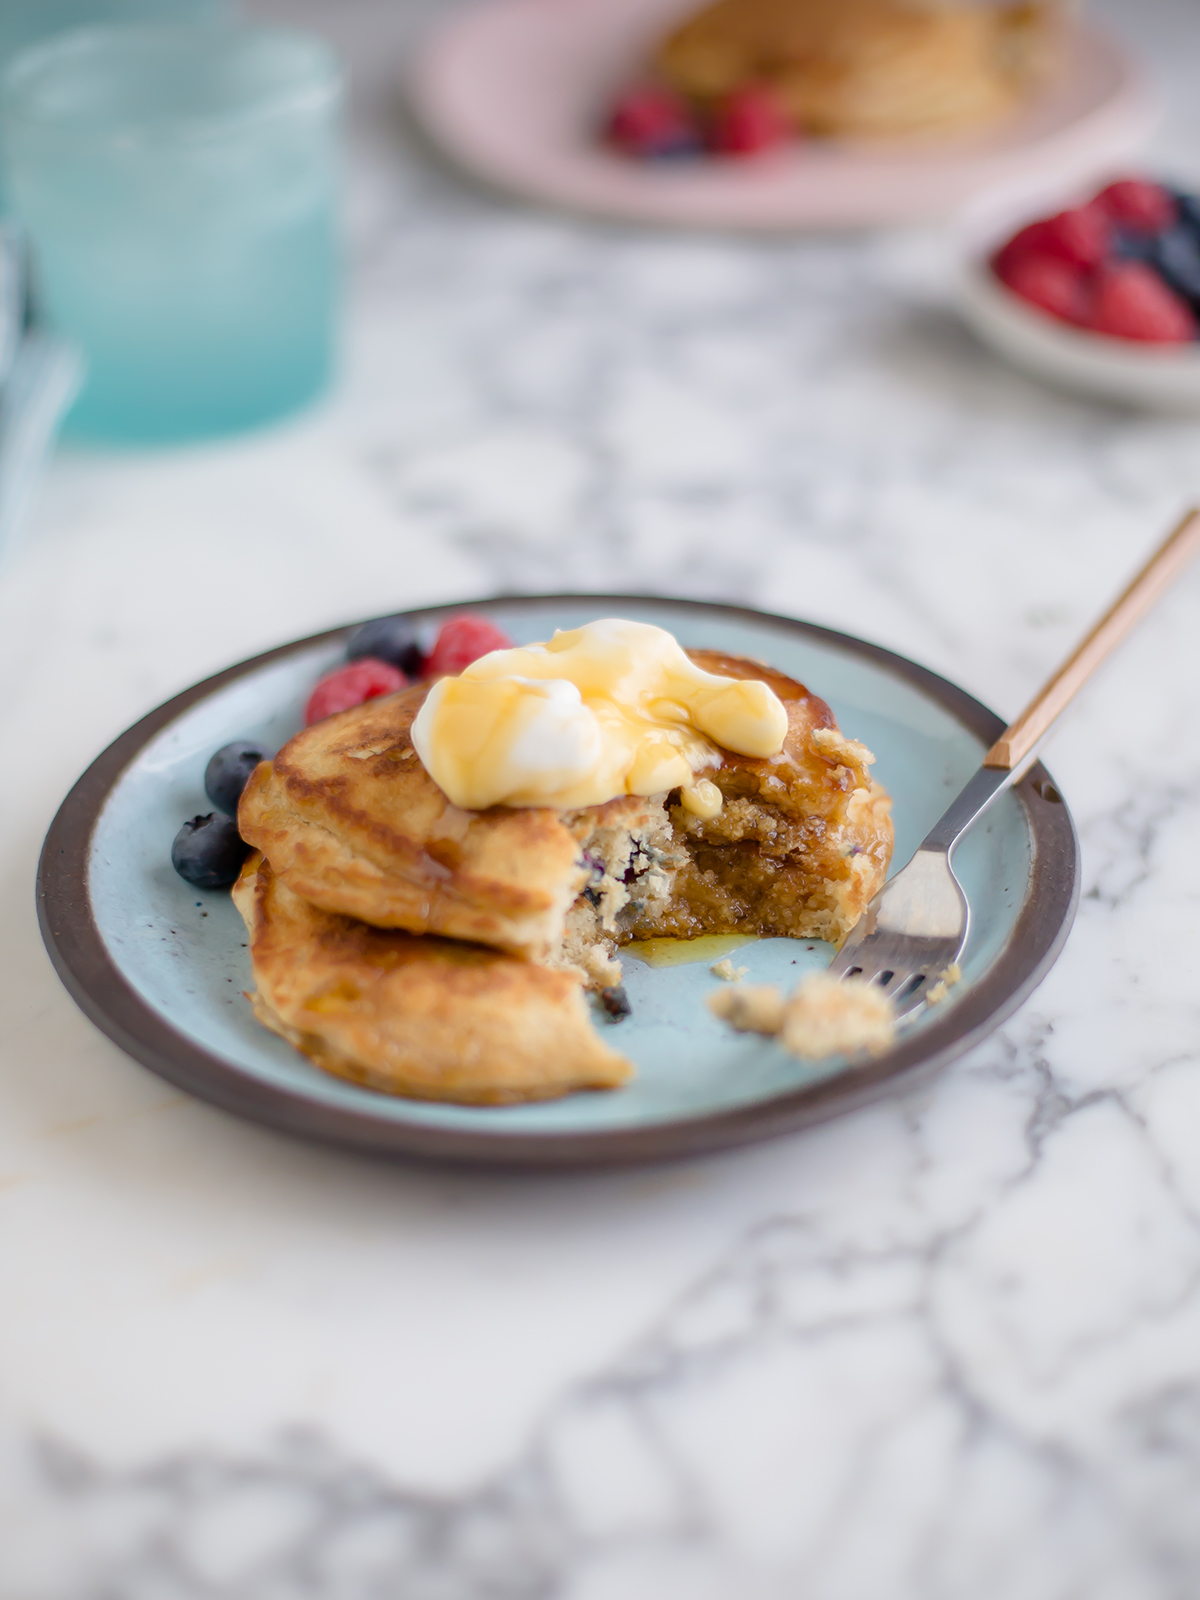 Fluffy blueberry & banana pancakes with a dash of oats